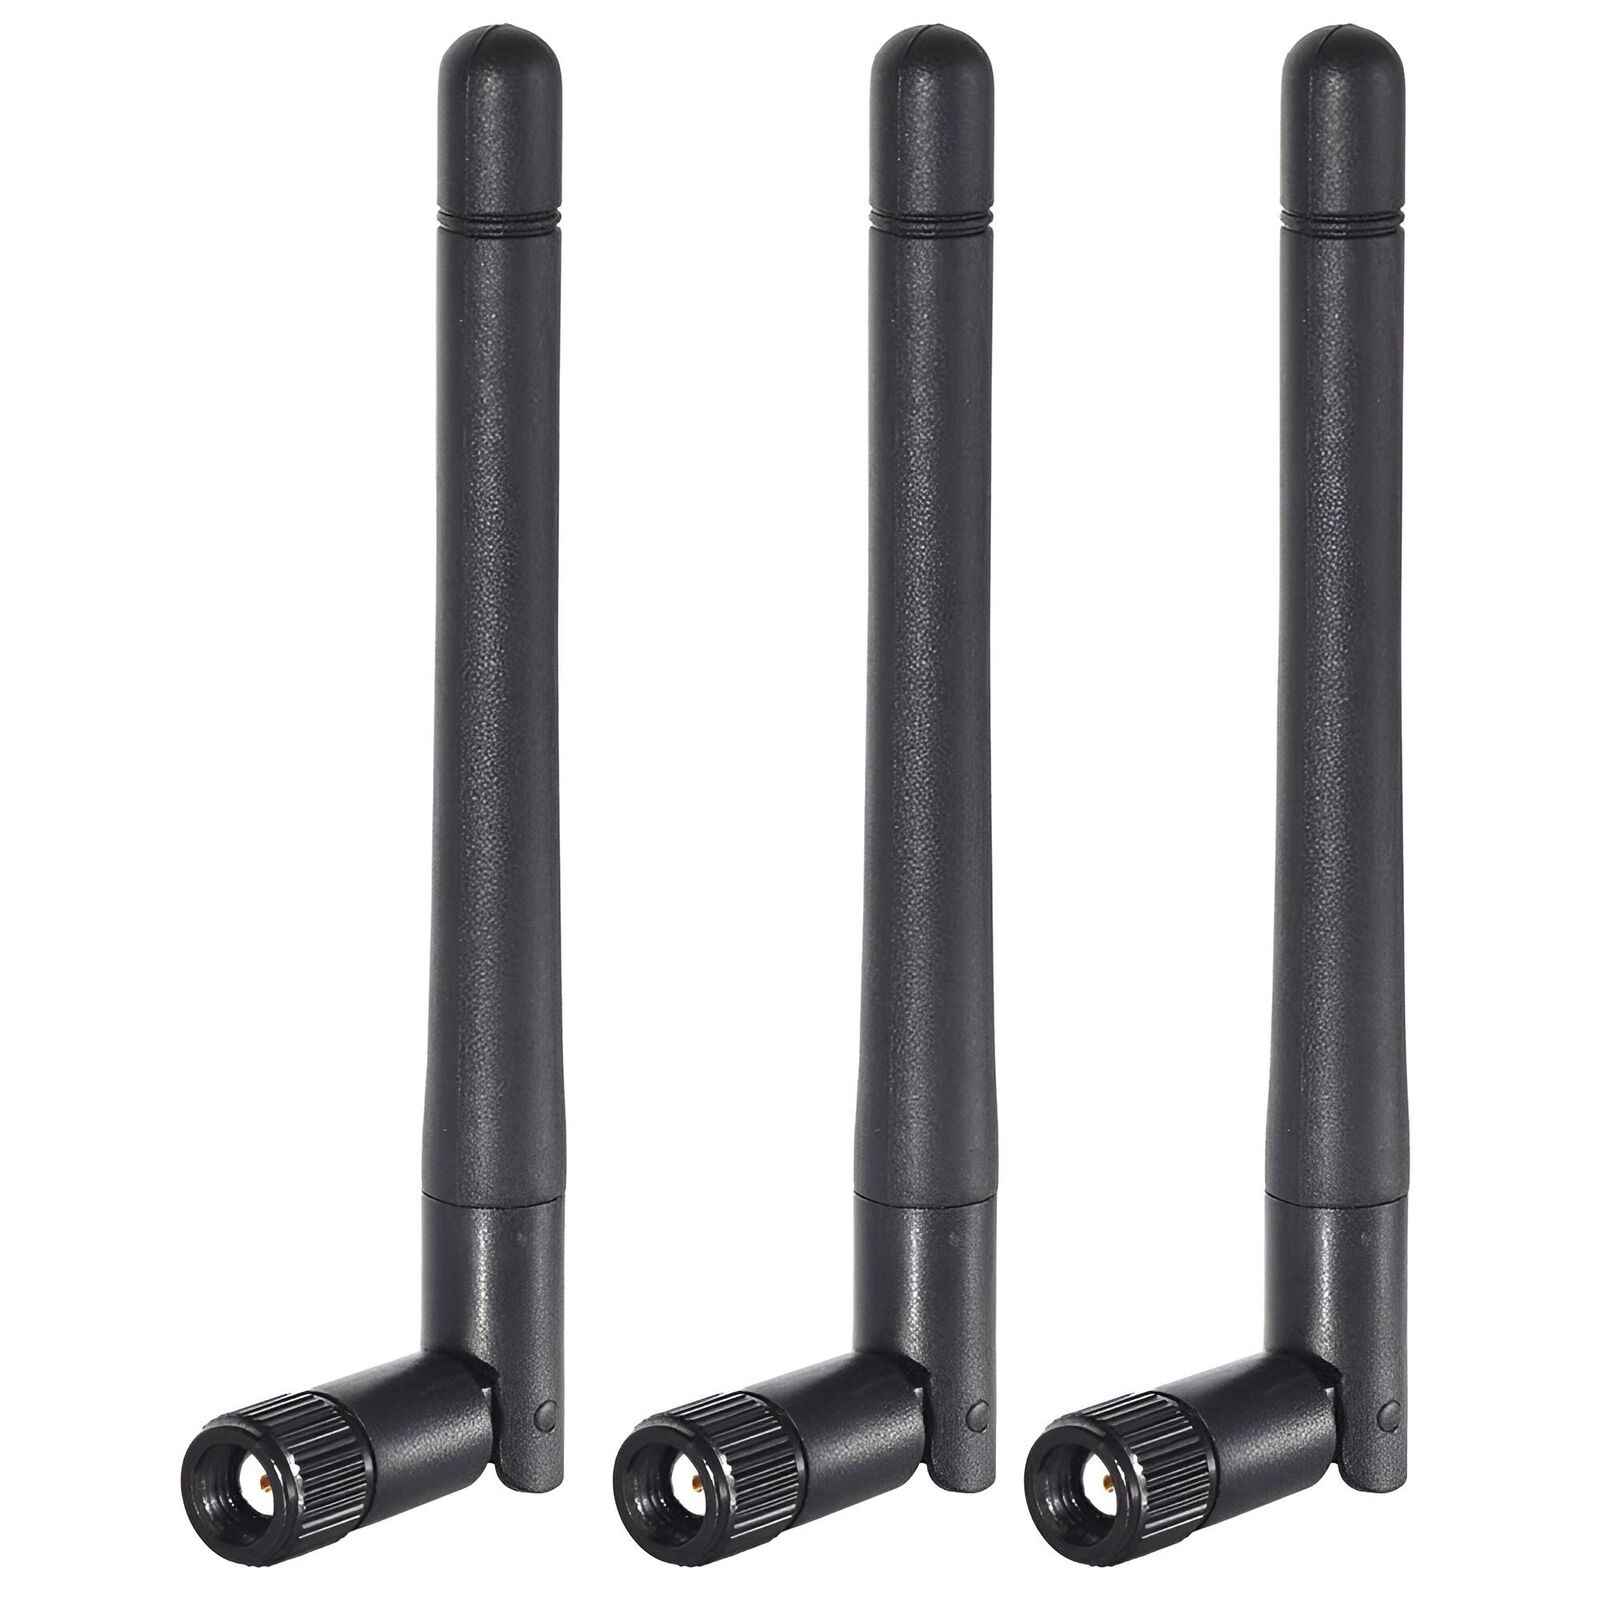 (3-pack) RP-SMA Antenna for WiFi 2.4GHz 5Ghz Wireless Router or Card 3X